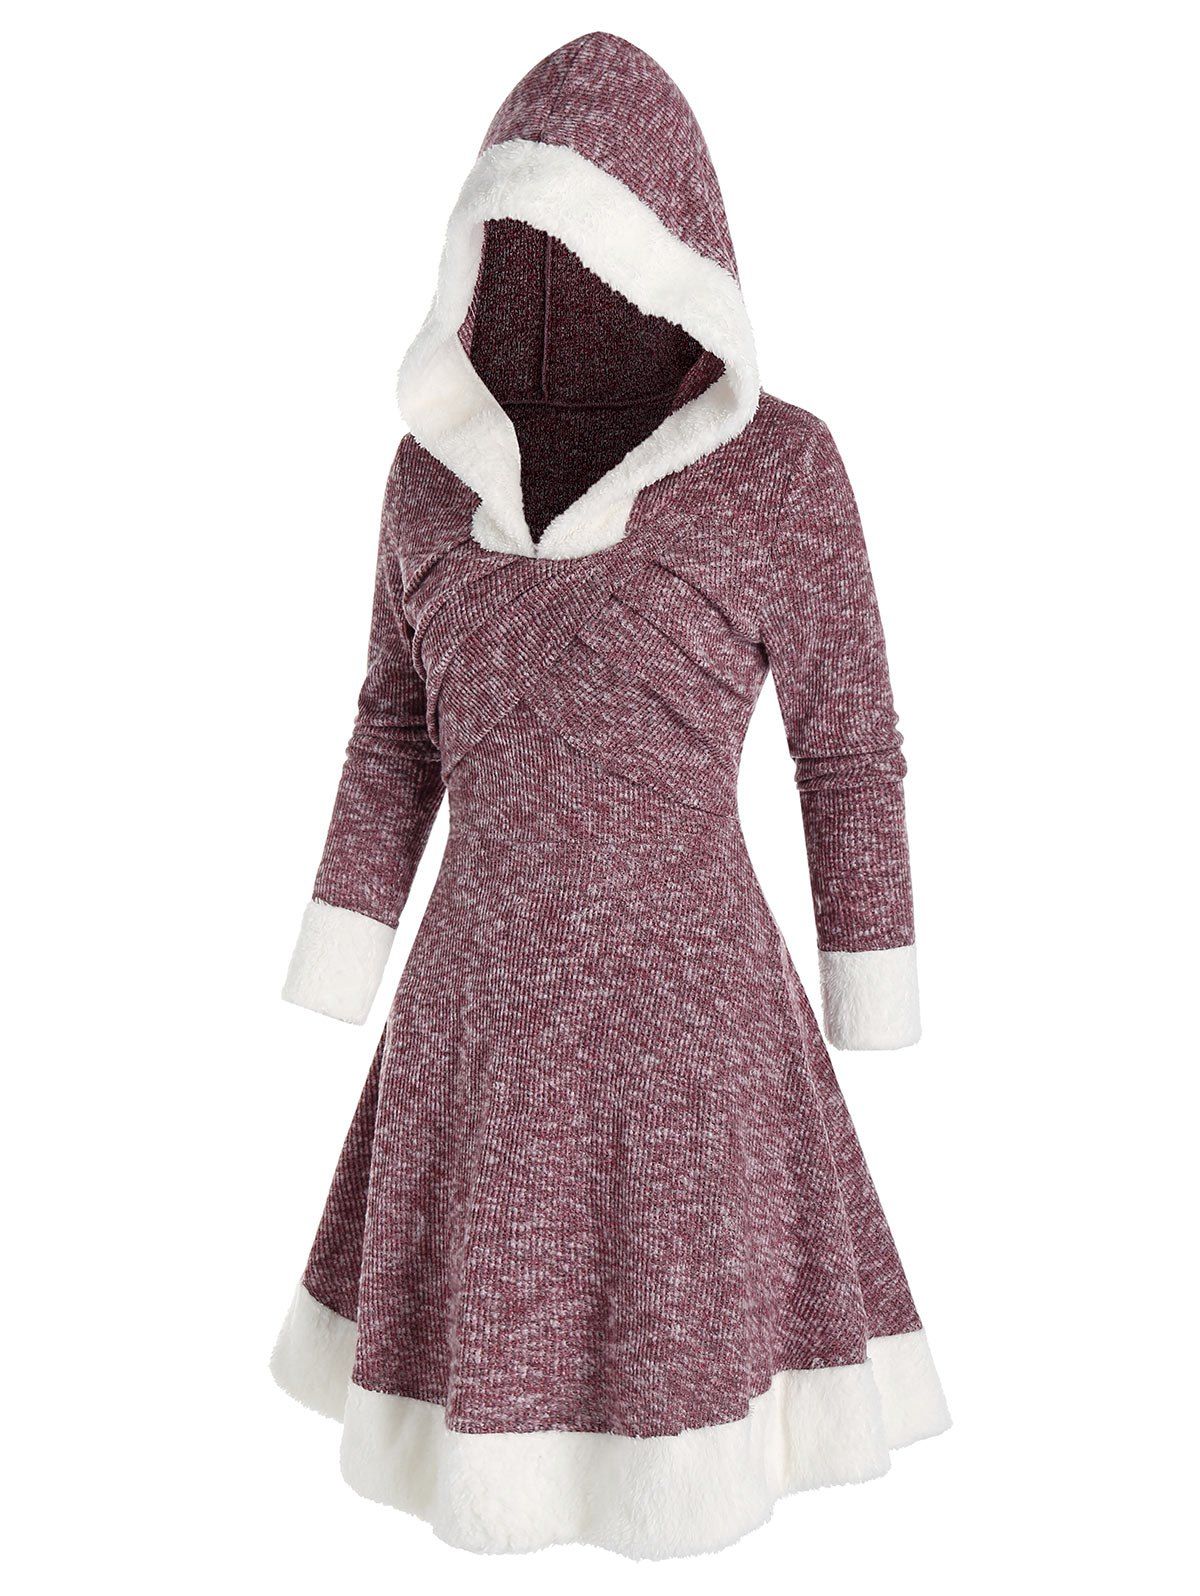 Hooded Fuzzy Panel Marled Knitted Dress - RED WINE M